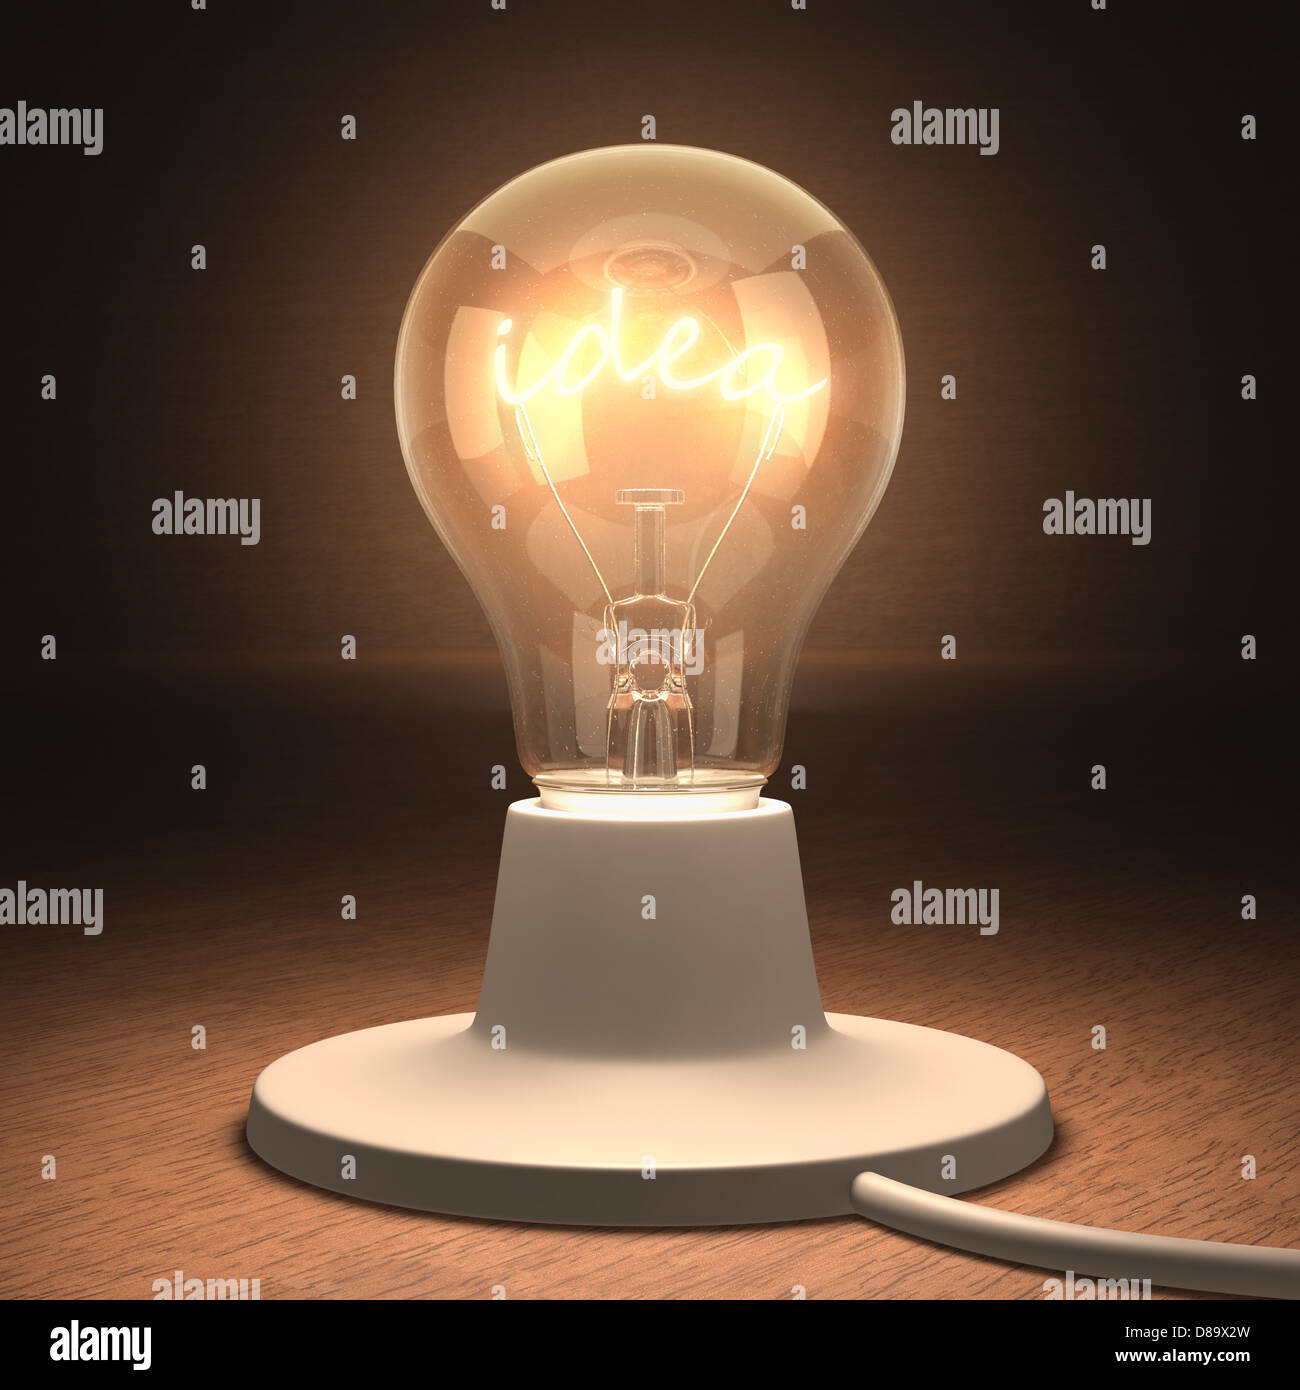 lamp lit with the filament-shaped of the idea word. Stock Photo